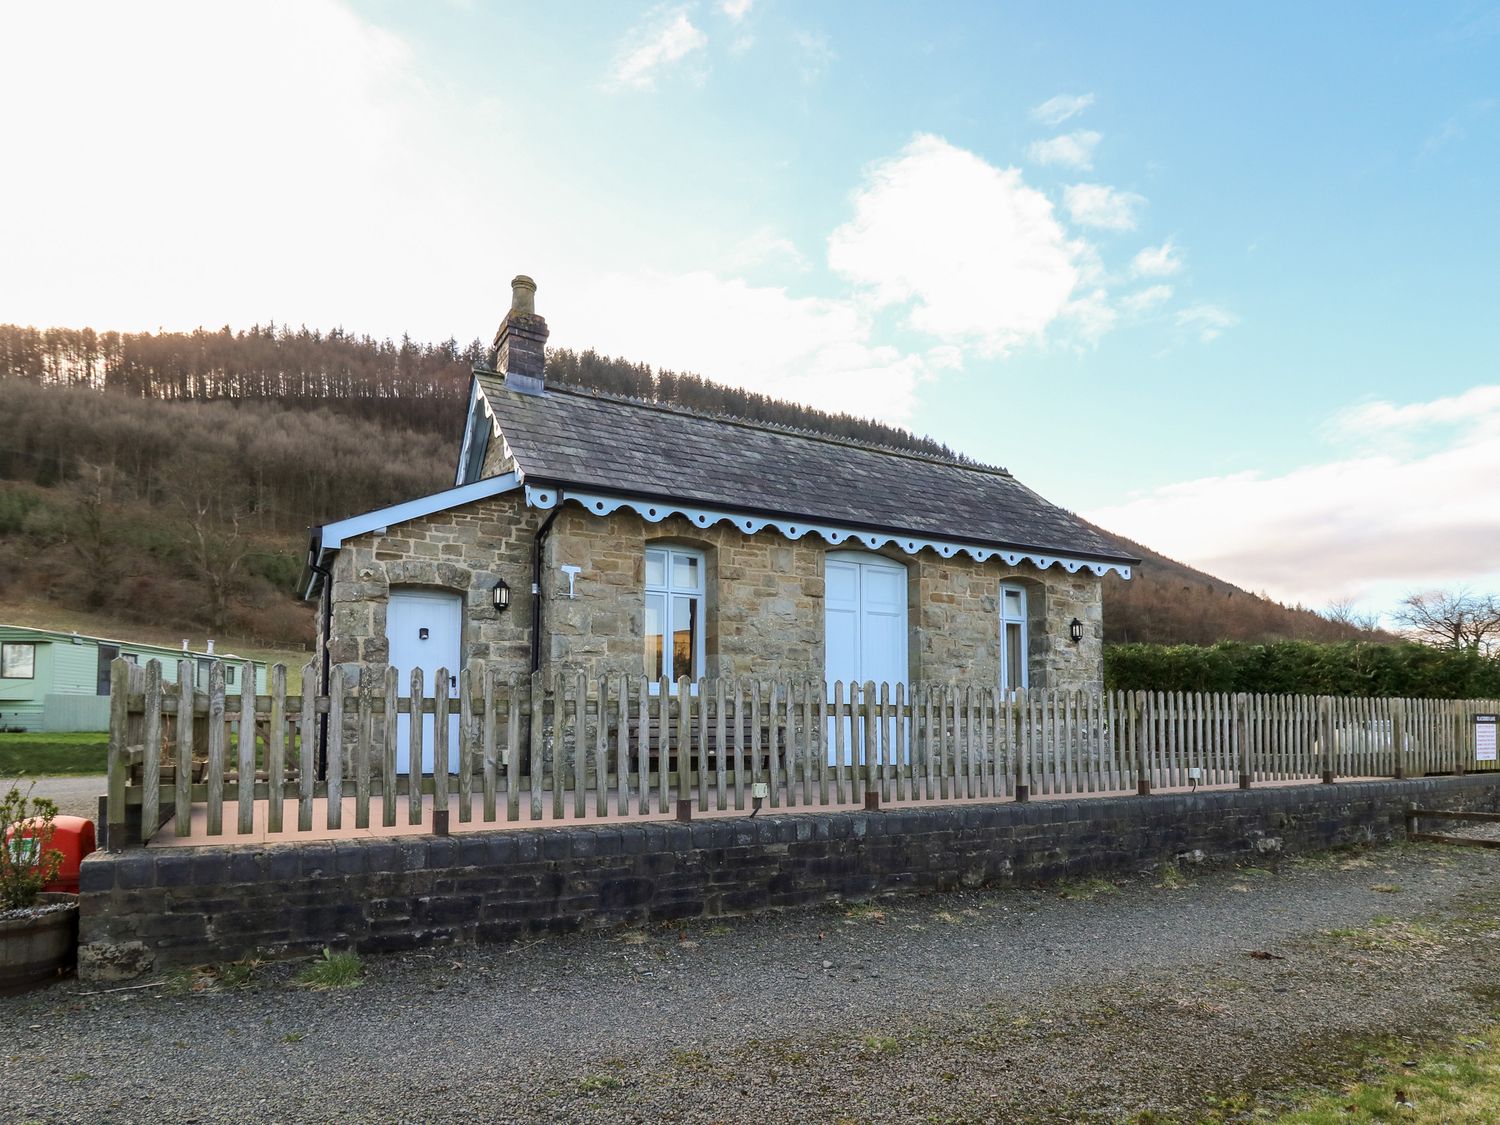 Railway Station Cottage - Mid Wales - 1139597 - photo 1